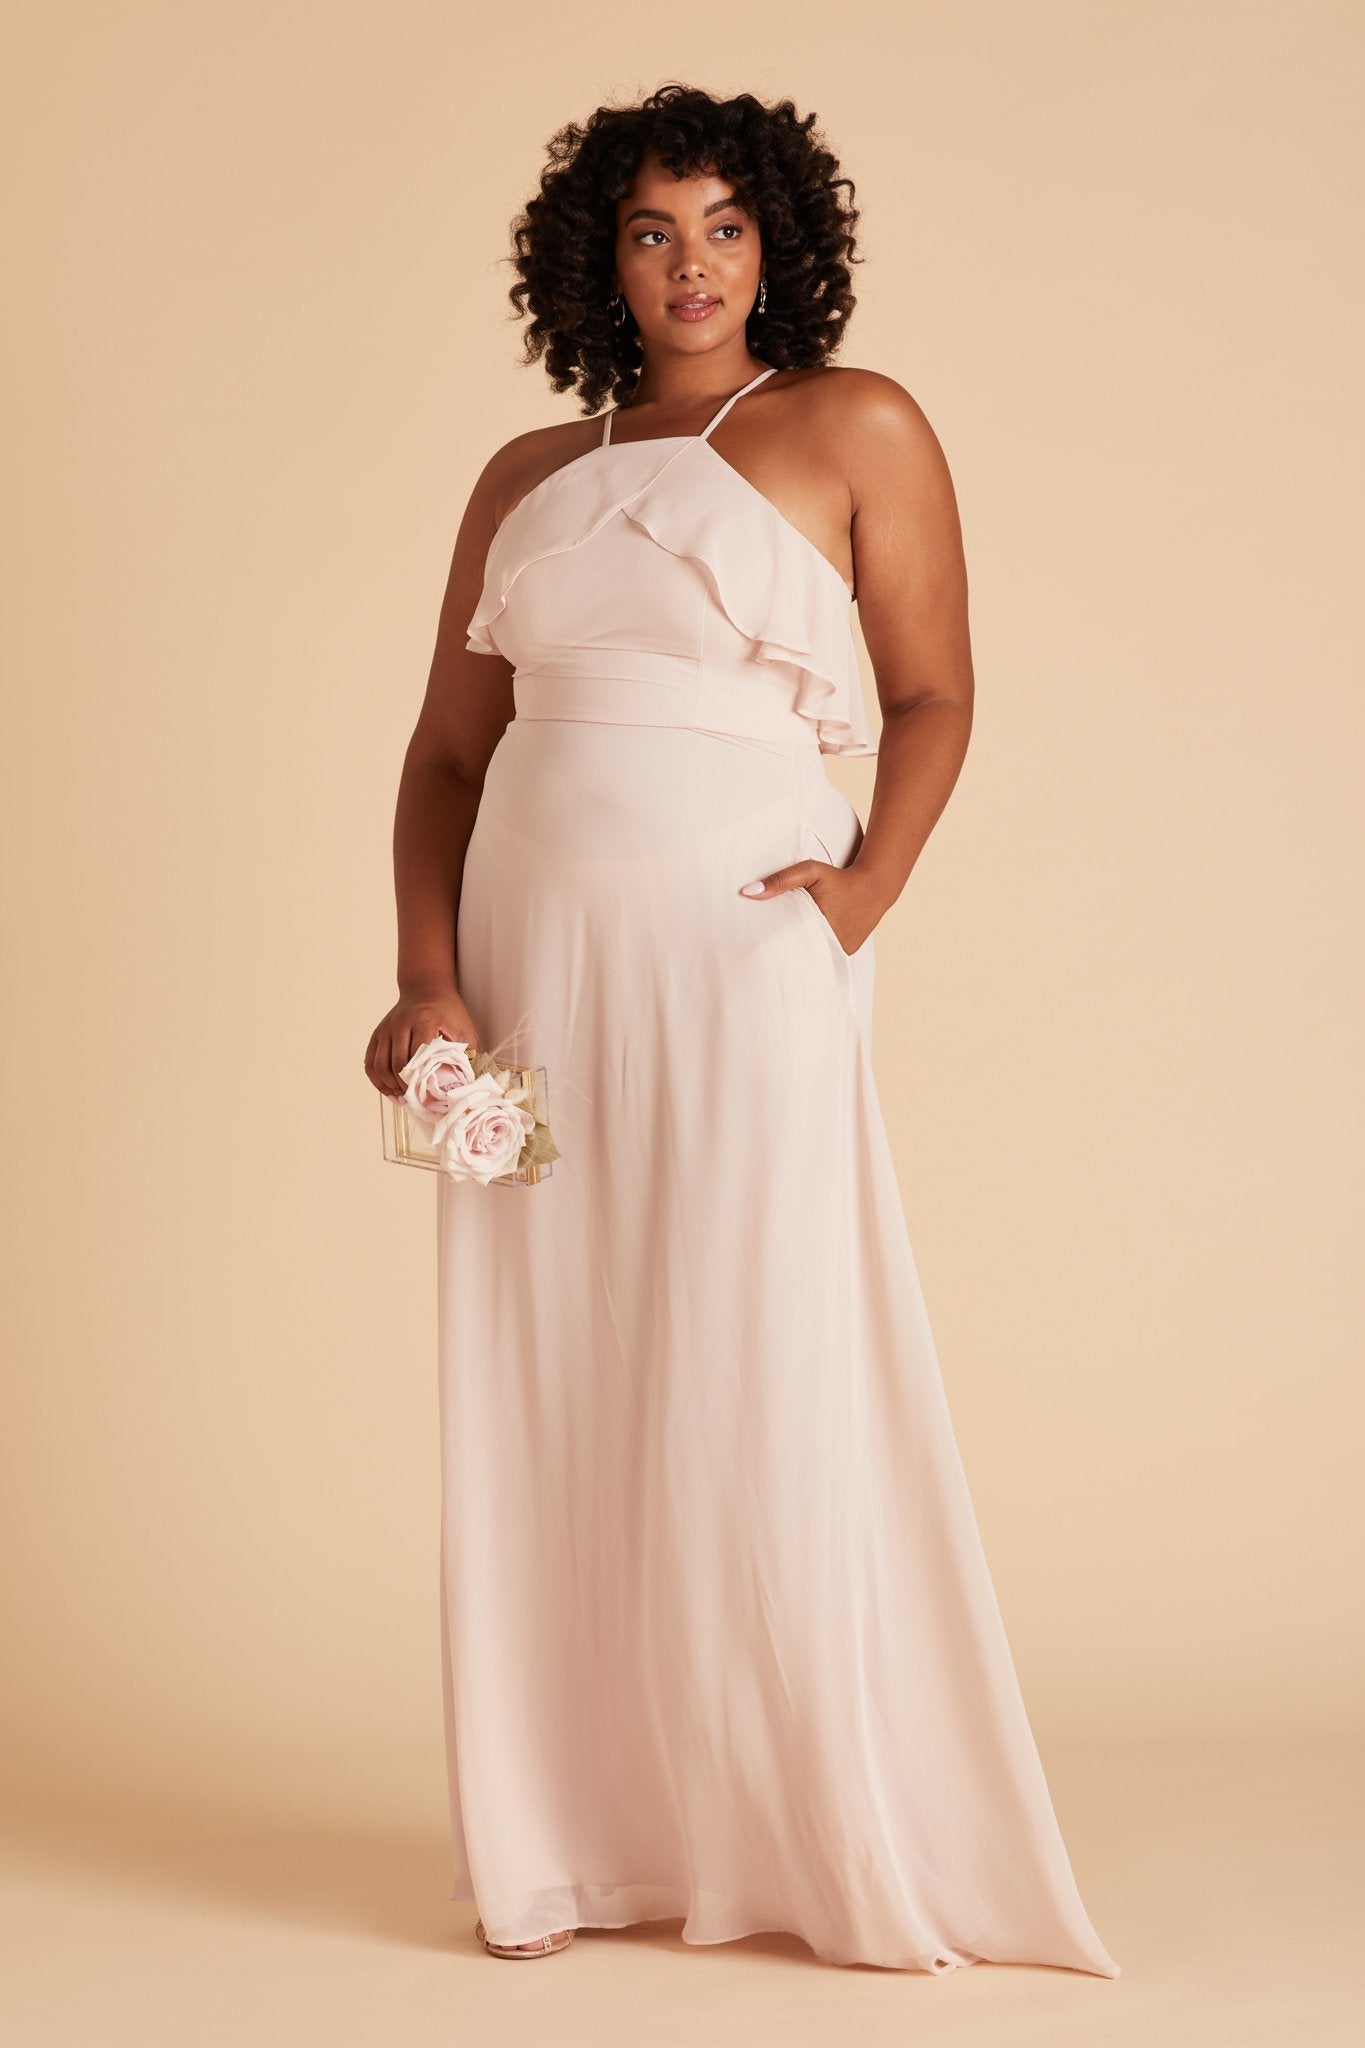 Jules plus size bridesmaid dress in pale blush chiffon by Birdy Grey, front view with hand in pocket